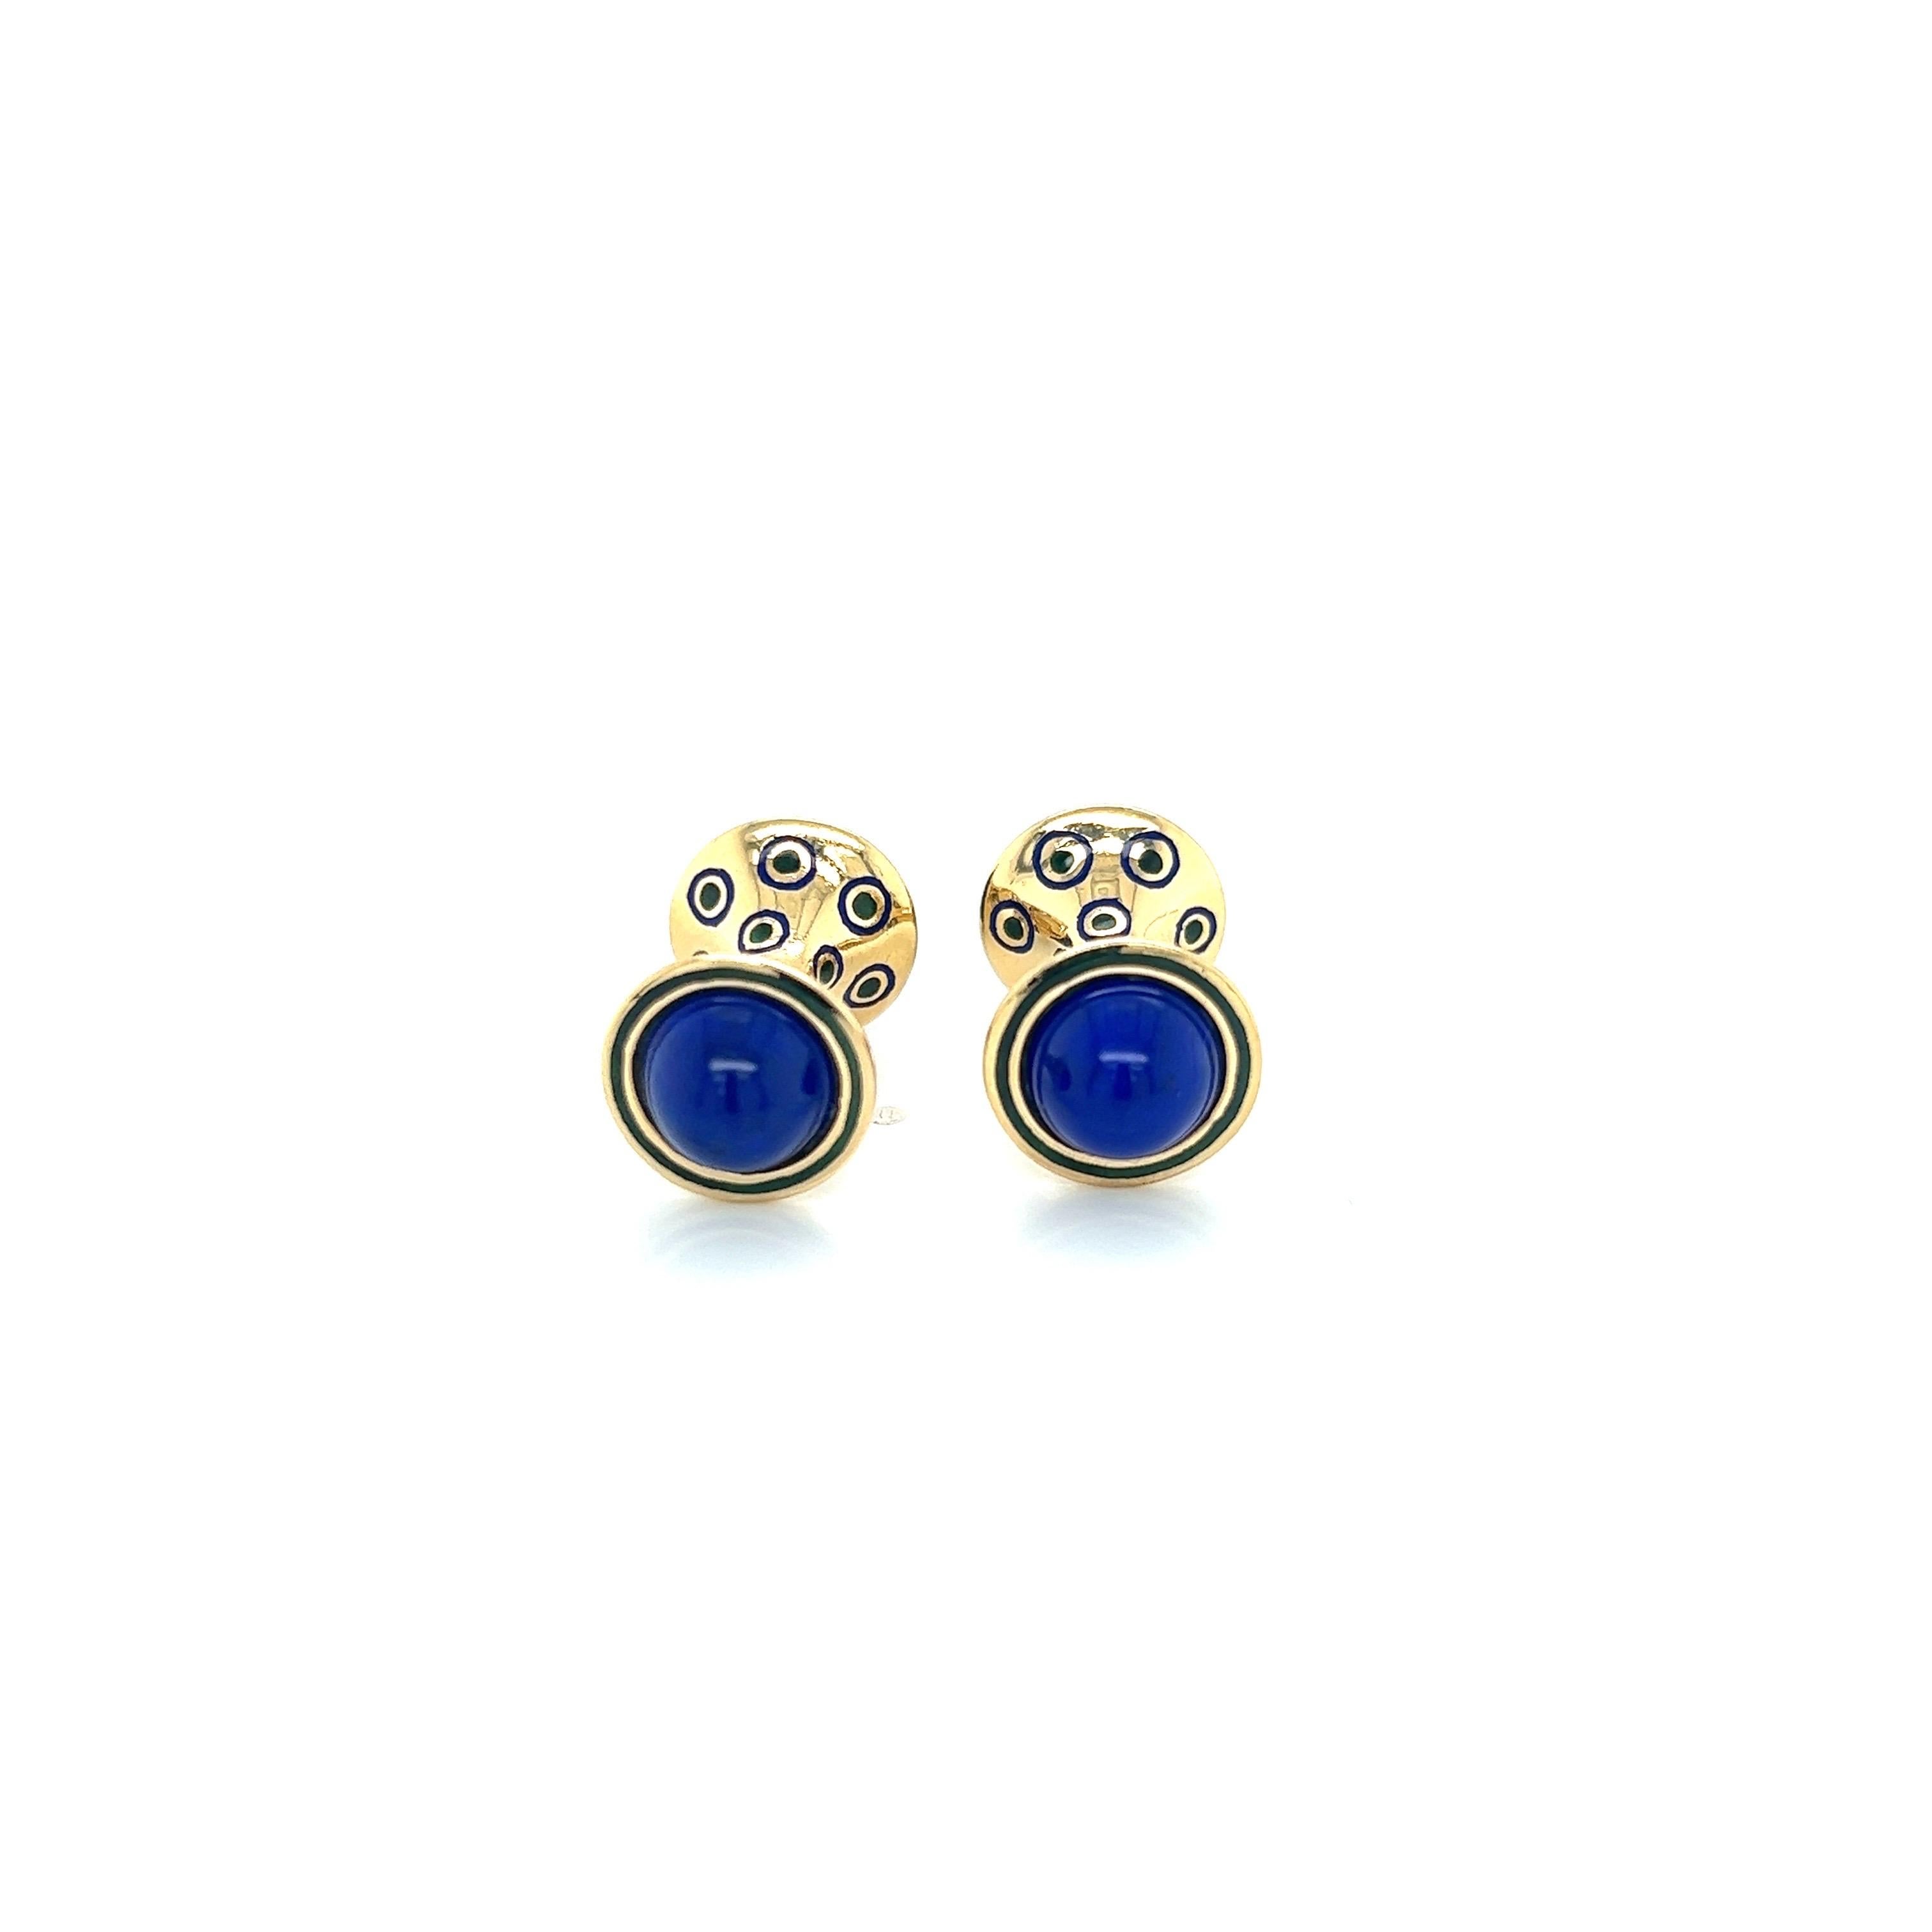 18k yellow gold cabochon lapis lazuli and blue and green enamel cufflinks are a stylish and sophisticated accessory for any formal or semi-formal occasion. The rich and warm 18k yellow gold sets the tone for the piece. The lapis lazuli adds a deep